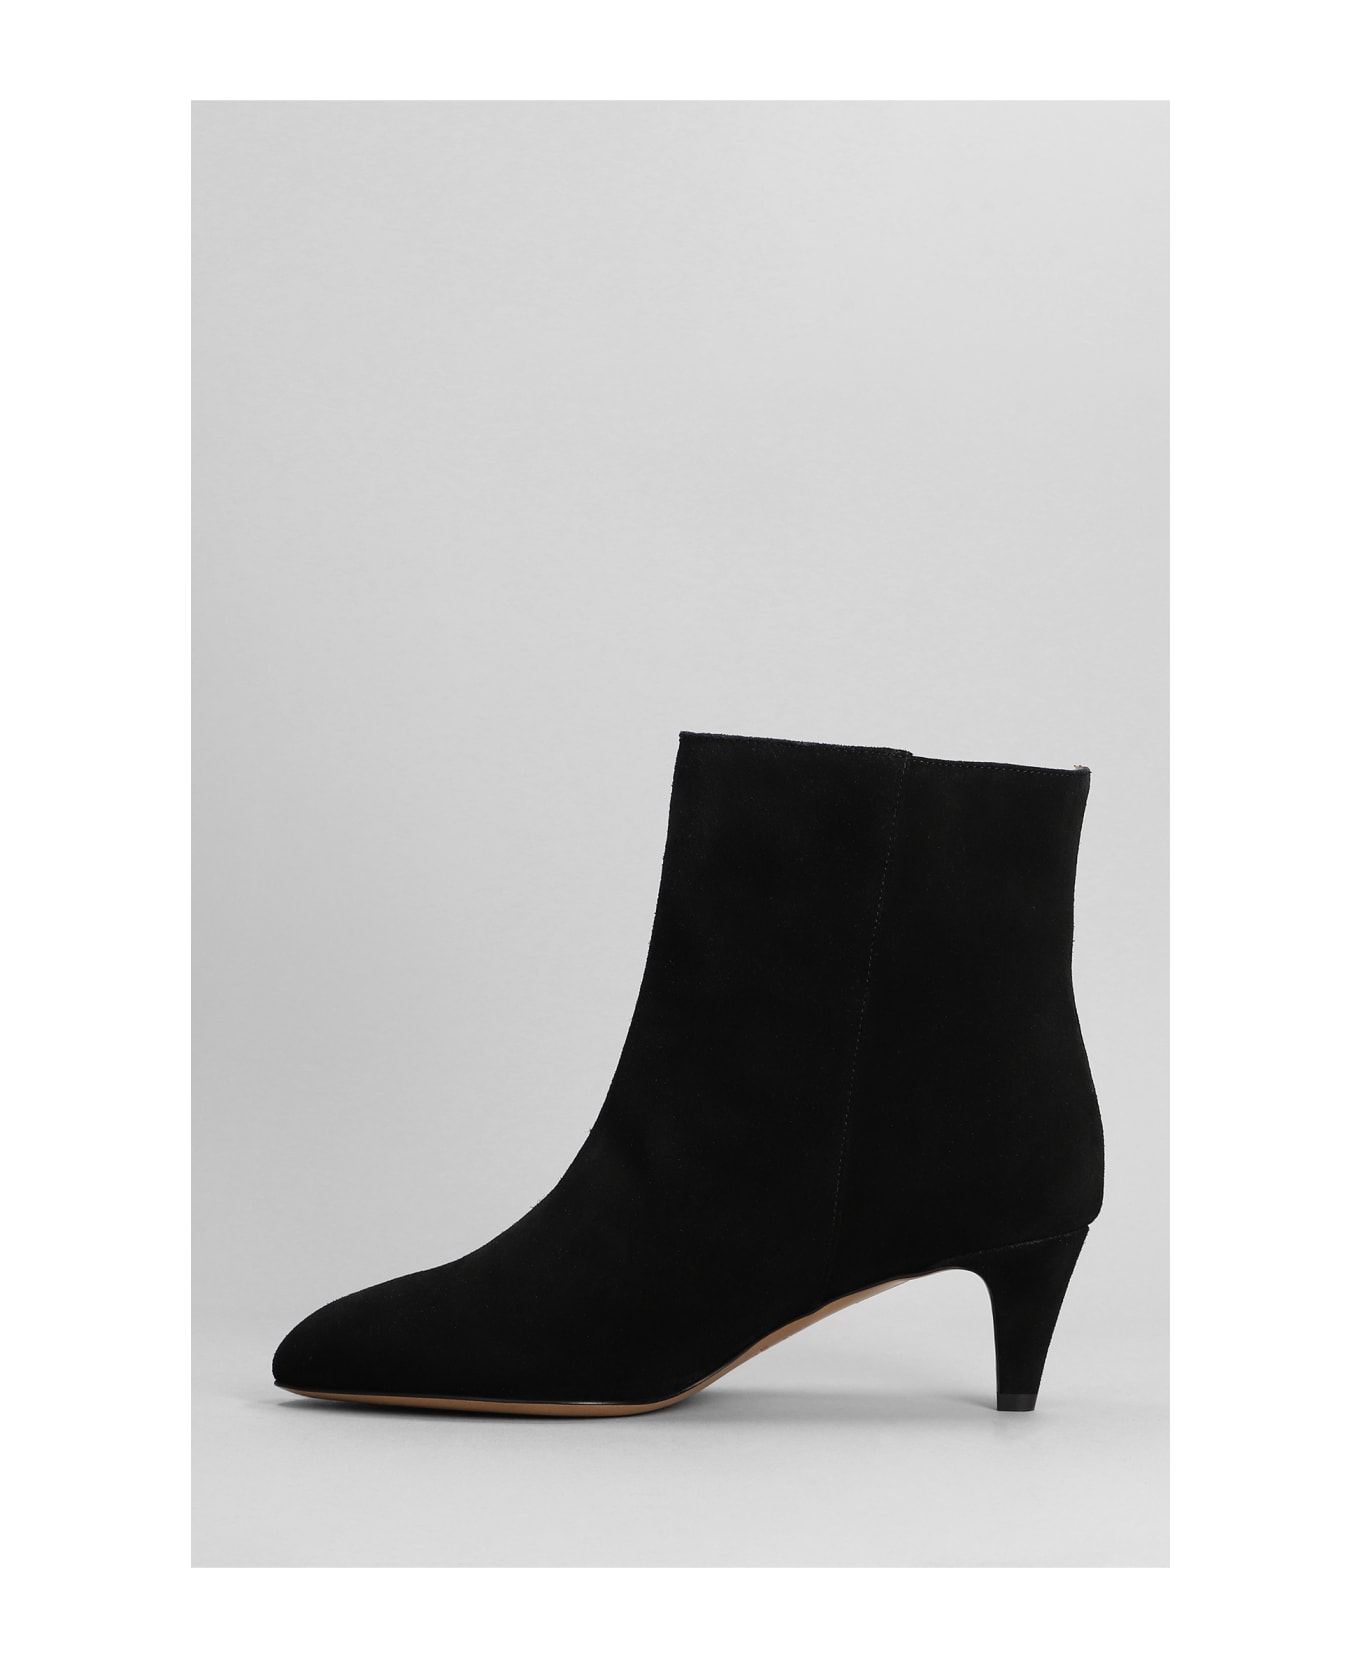 Isabel Marant Daxi Low Heels Ankle Boots In Black Suede - black ブーツ